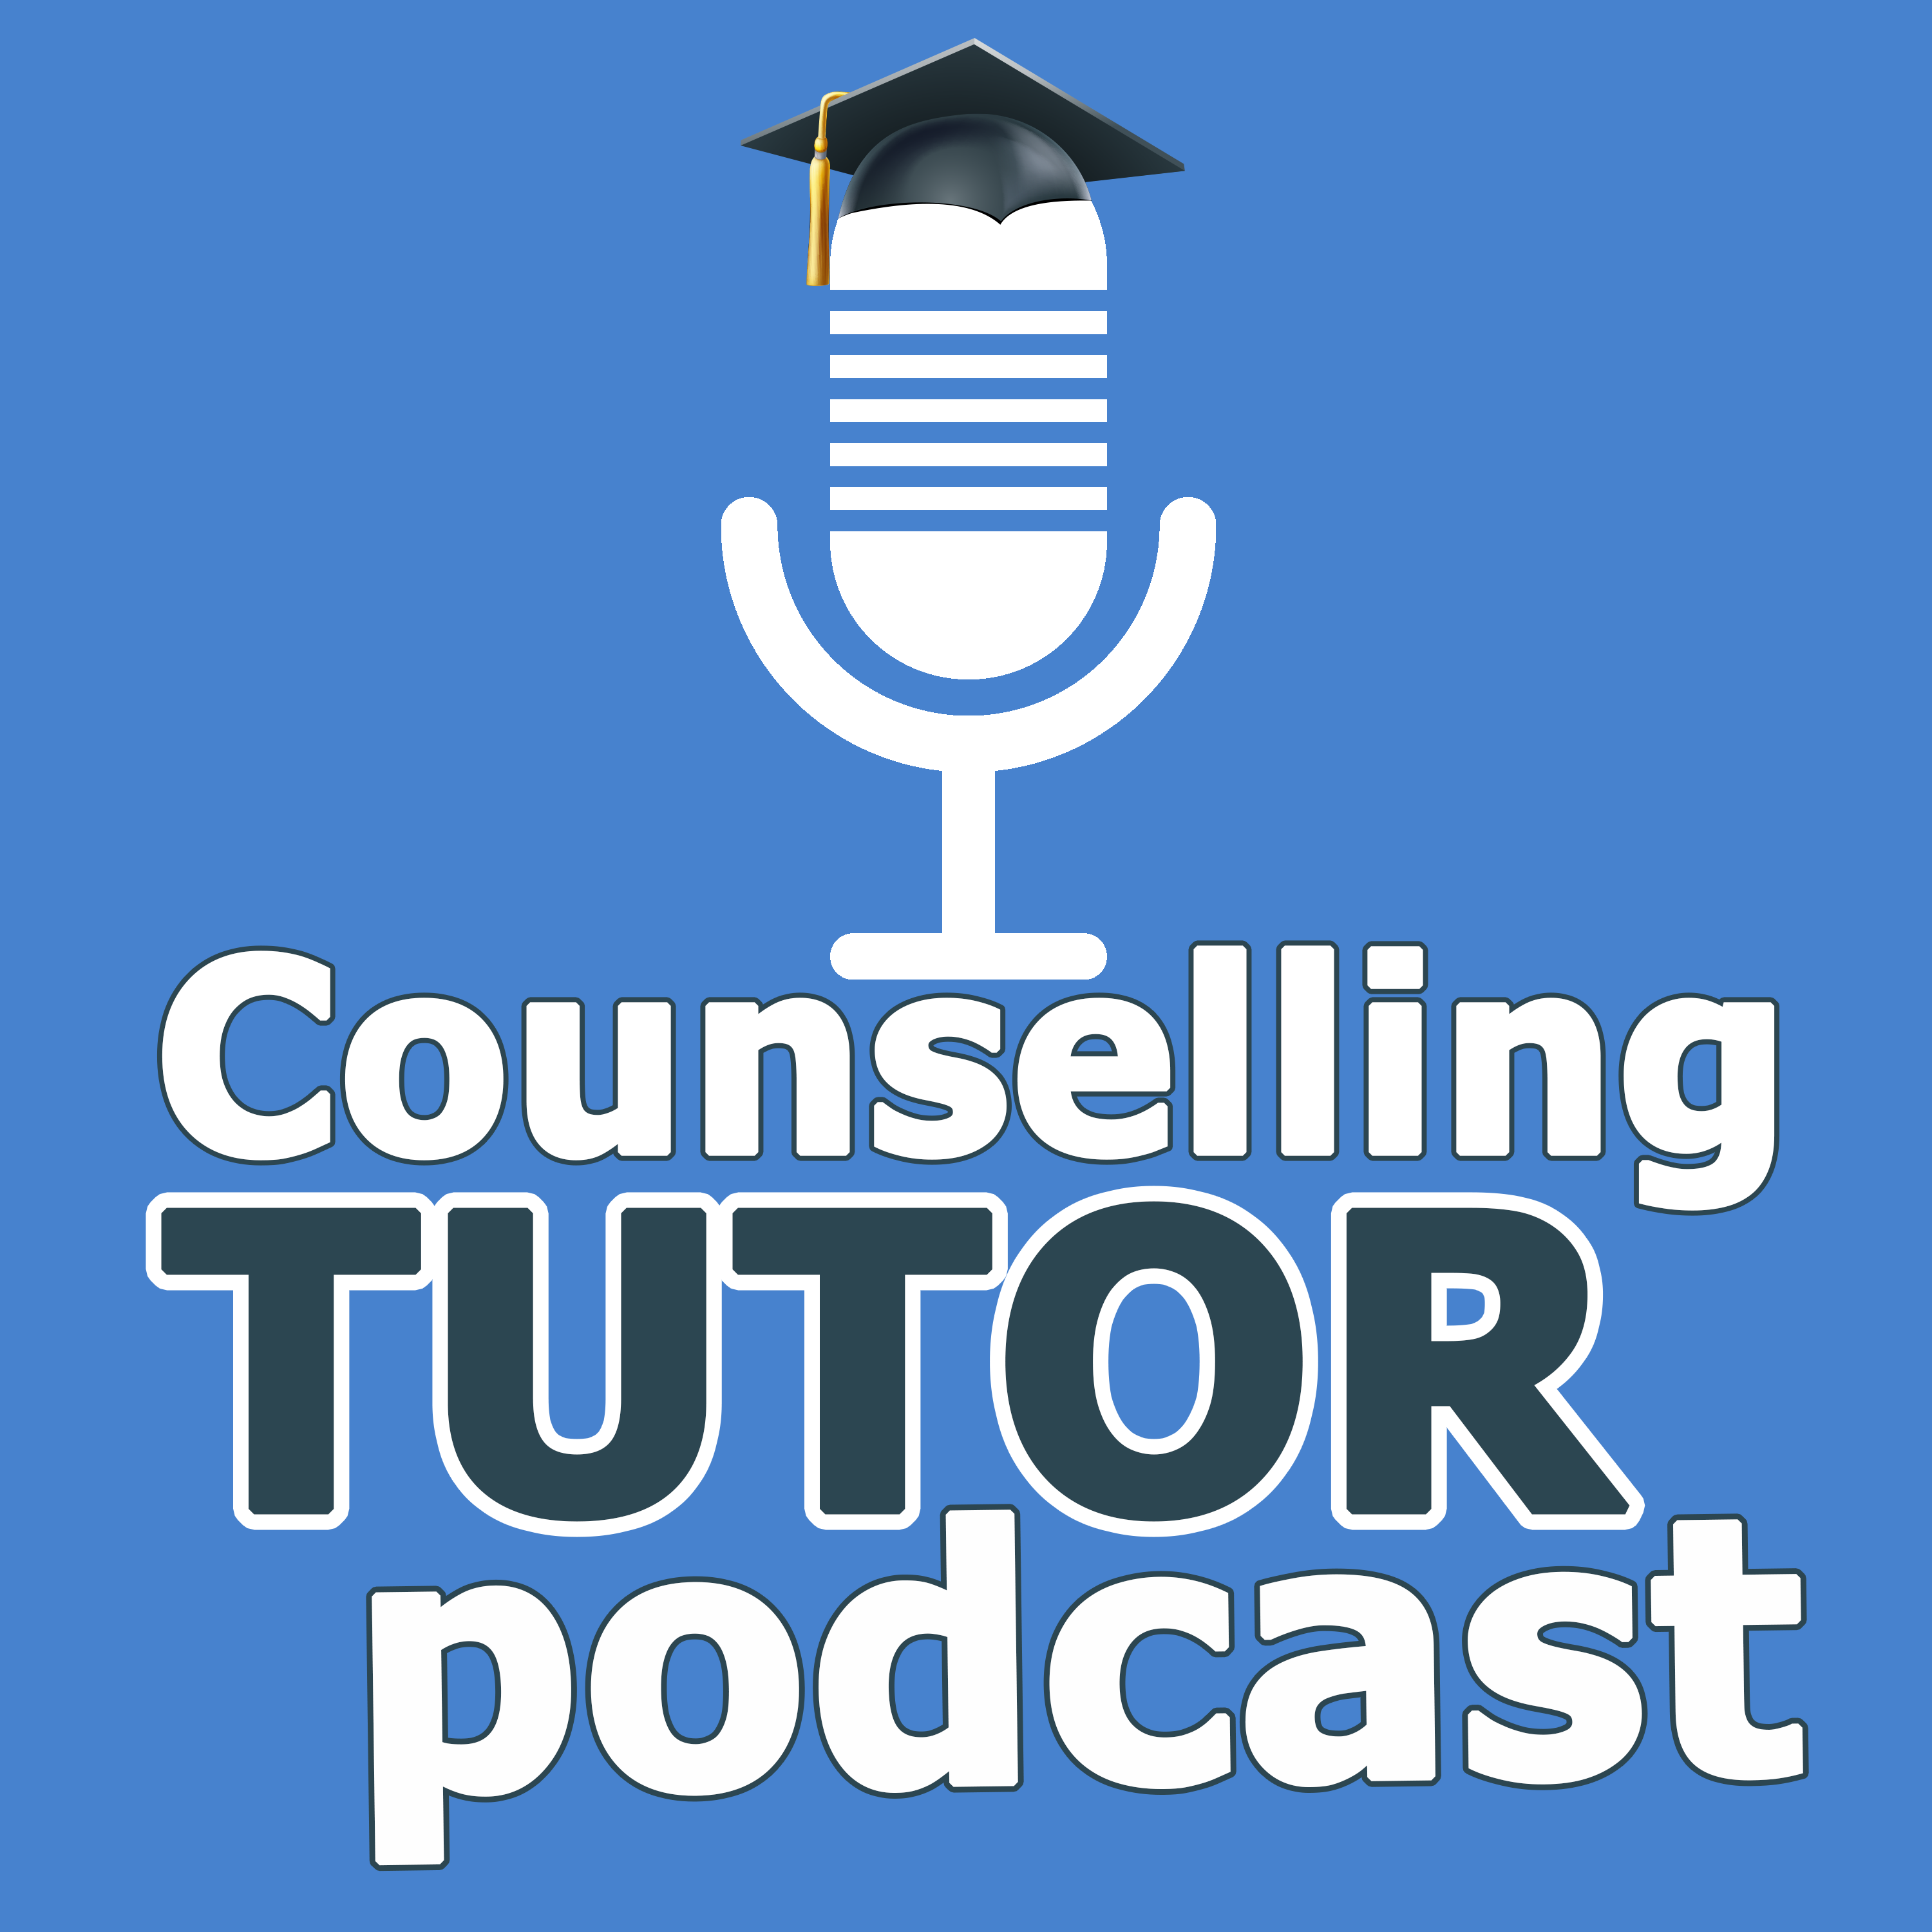 Counselling Tutor